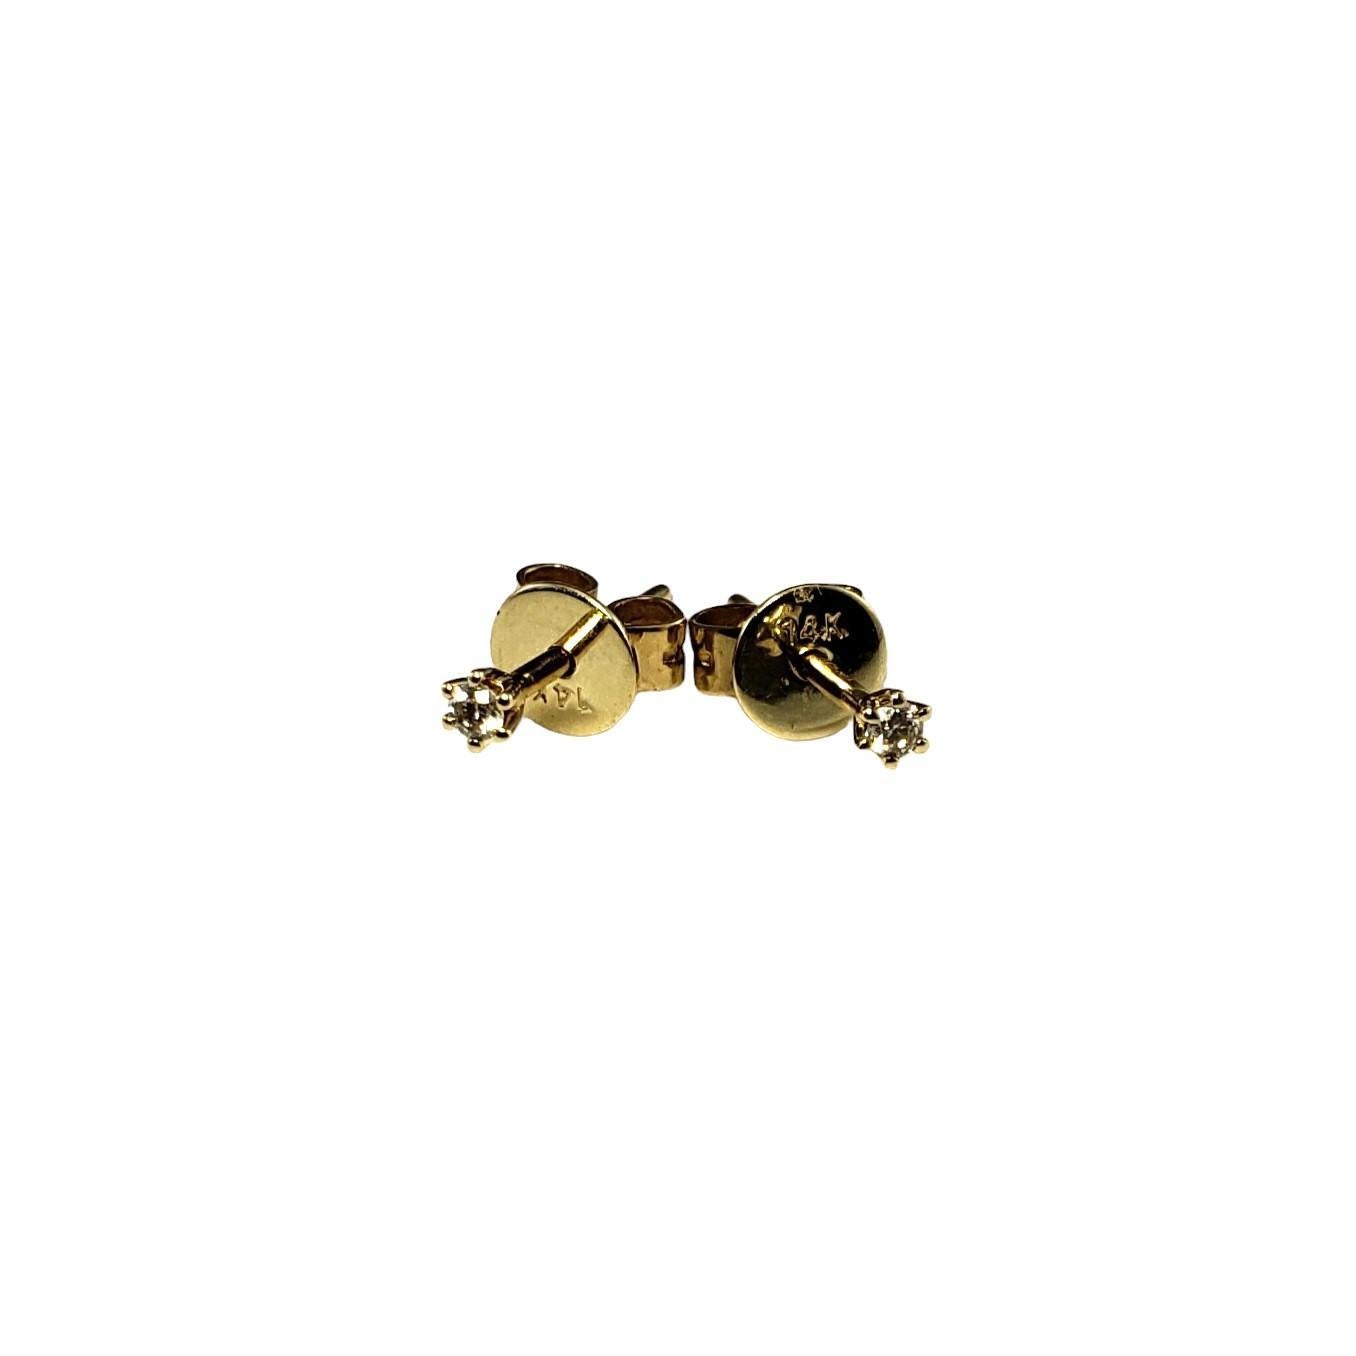 14K Yellow Gold Diamond Stud Earrings-

These sparkling stud earrings each feature one round brilliant cut diamond set in classic 14K yellow gold.  Push back closures.

Approximate total diamond weight: .04 ct.

Diamond color: J

Diamond clarity: